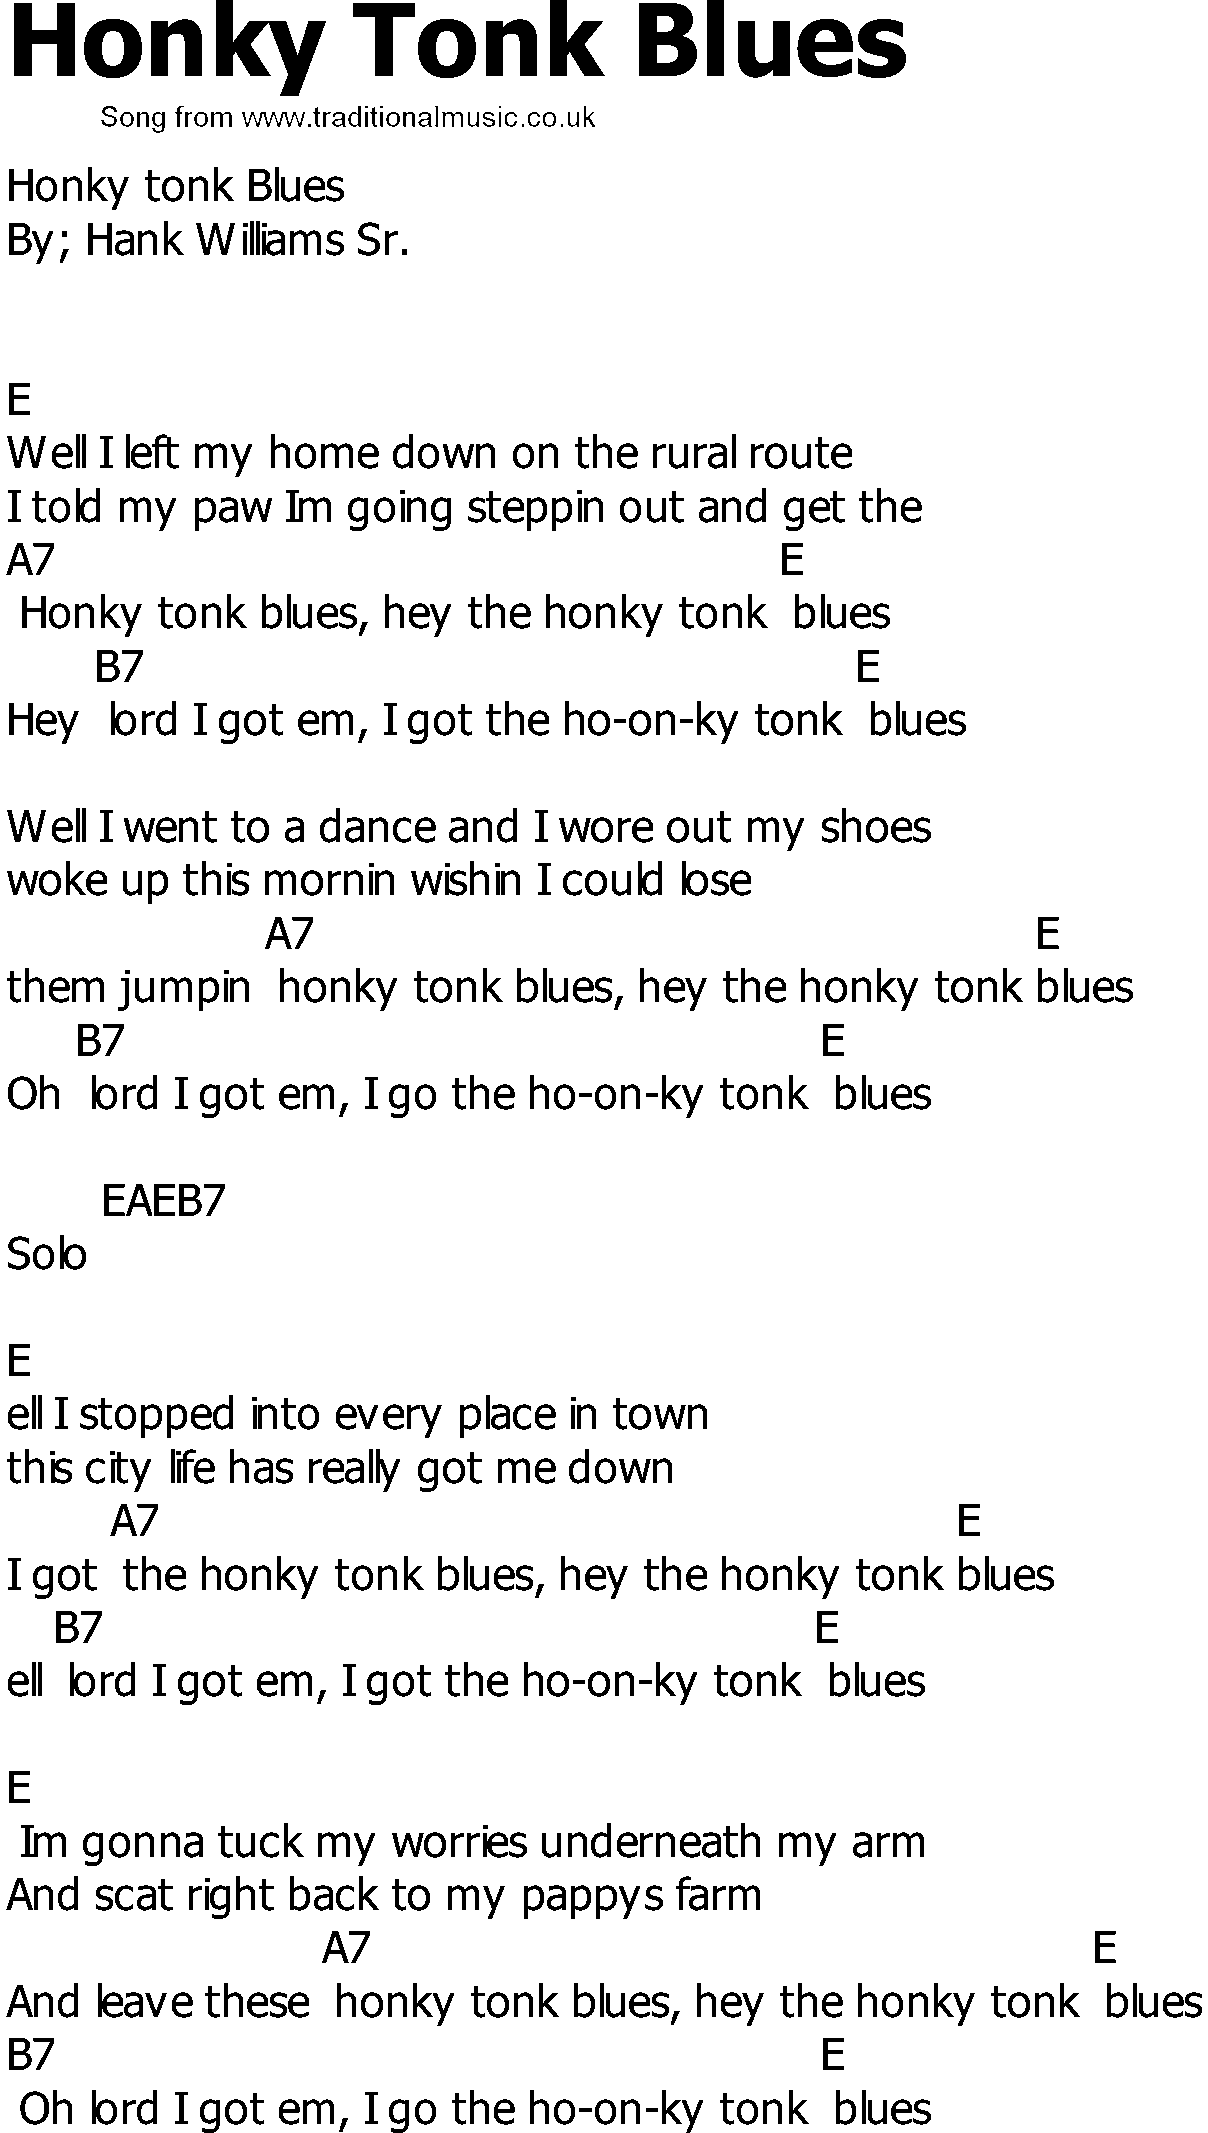 Old Country song lyrics with chords - Honky Tonk Blues